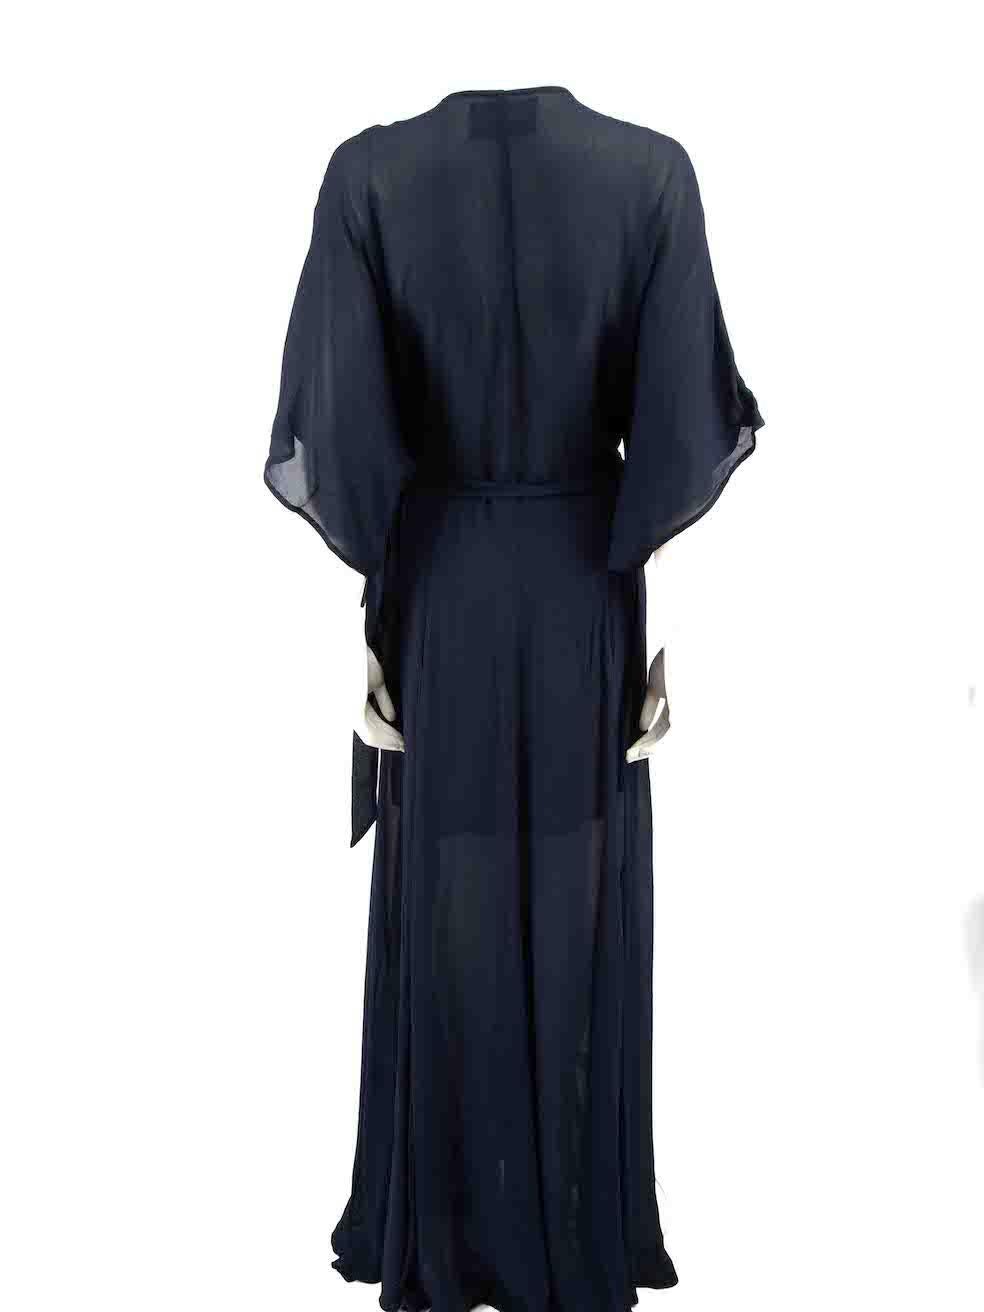 Reformation Navy Sheer Winslow Maxi Wrap Dress Size L In Good Condition For Sale In London, GB